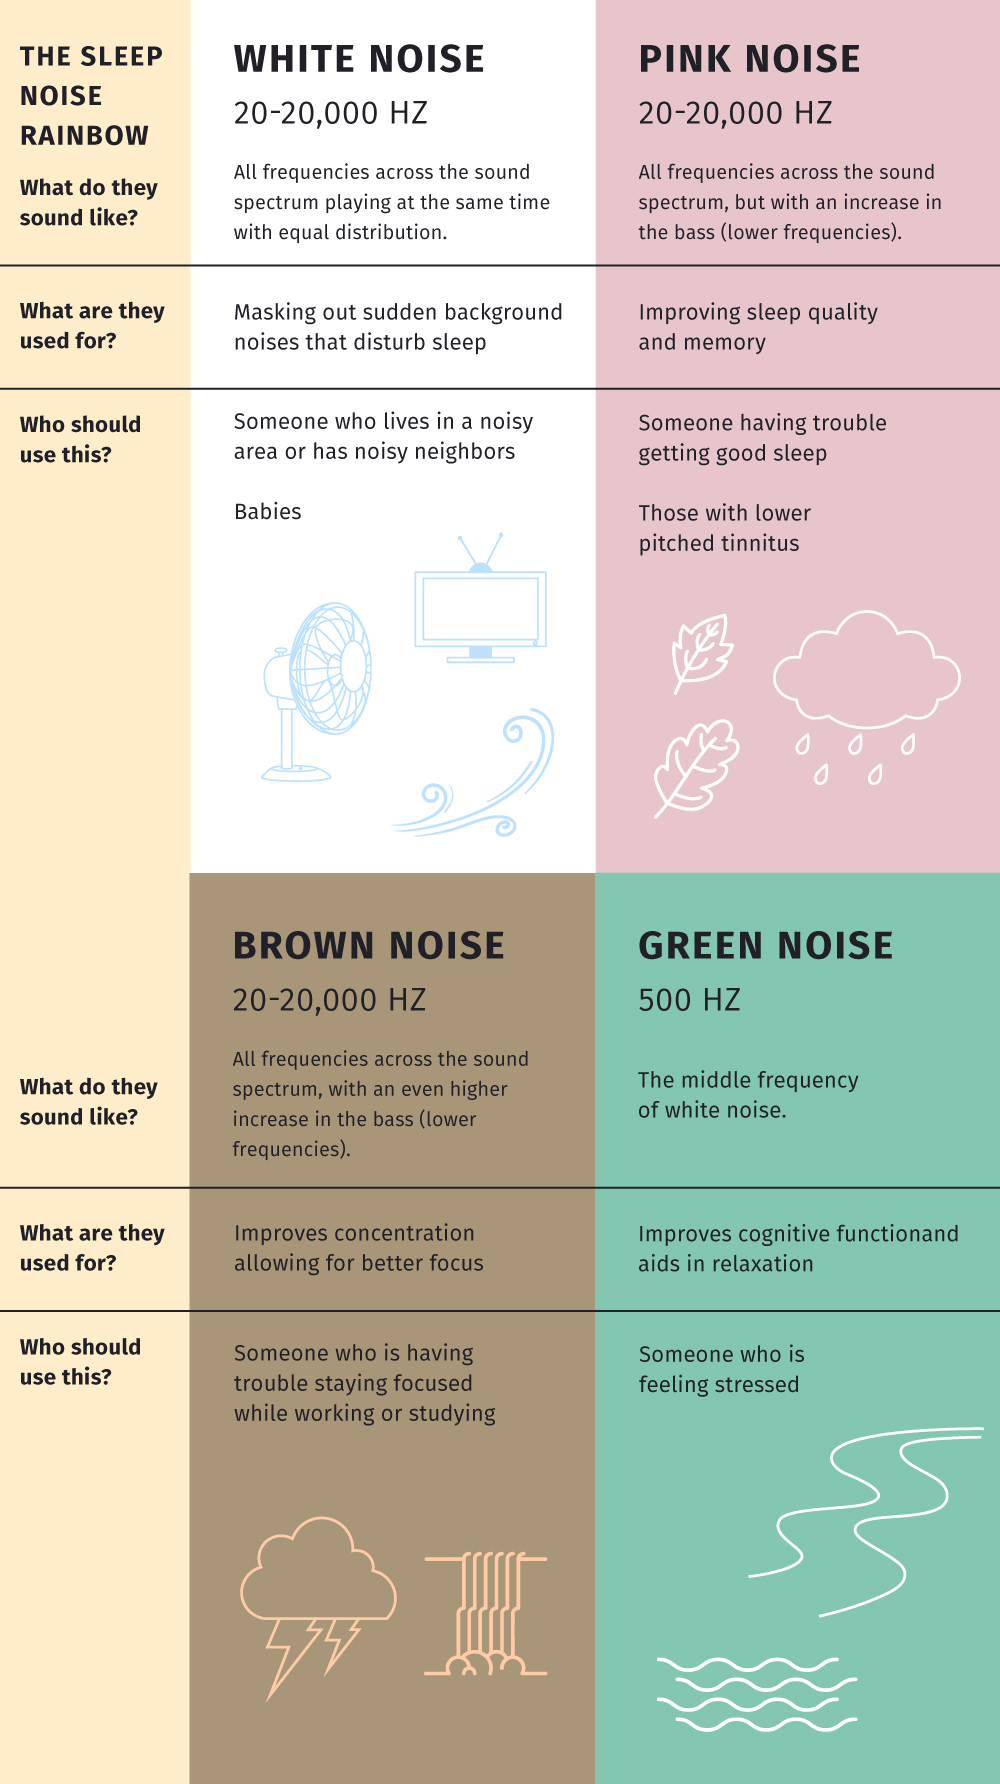 Pink Noise Vs White Noise: What's The Difference?